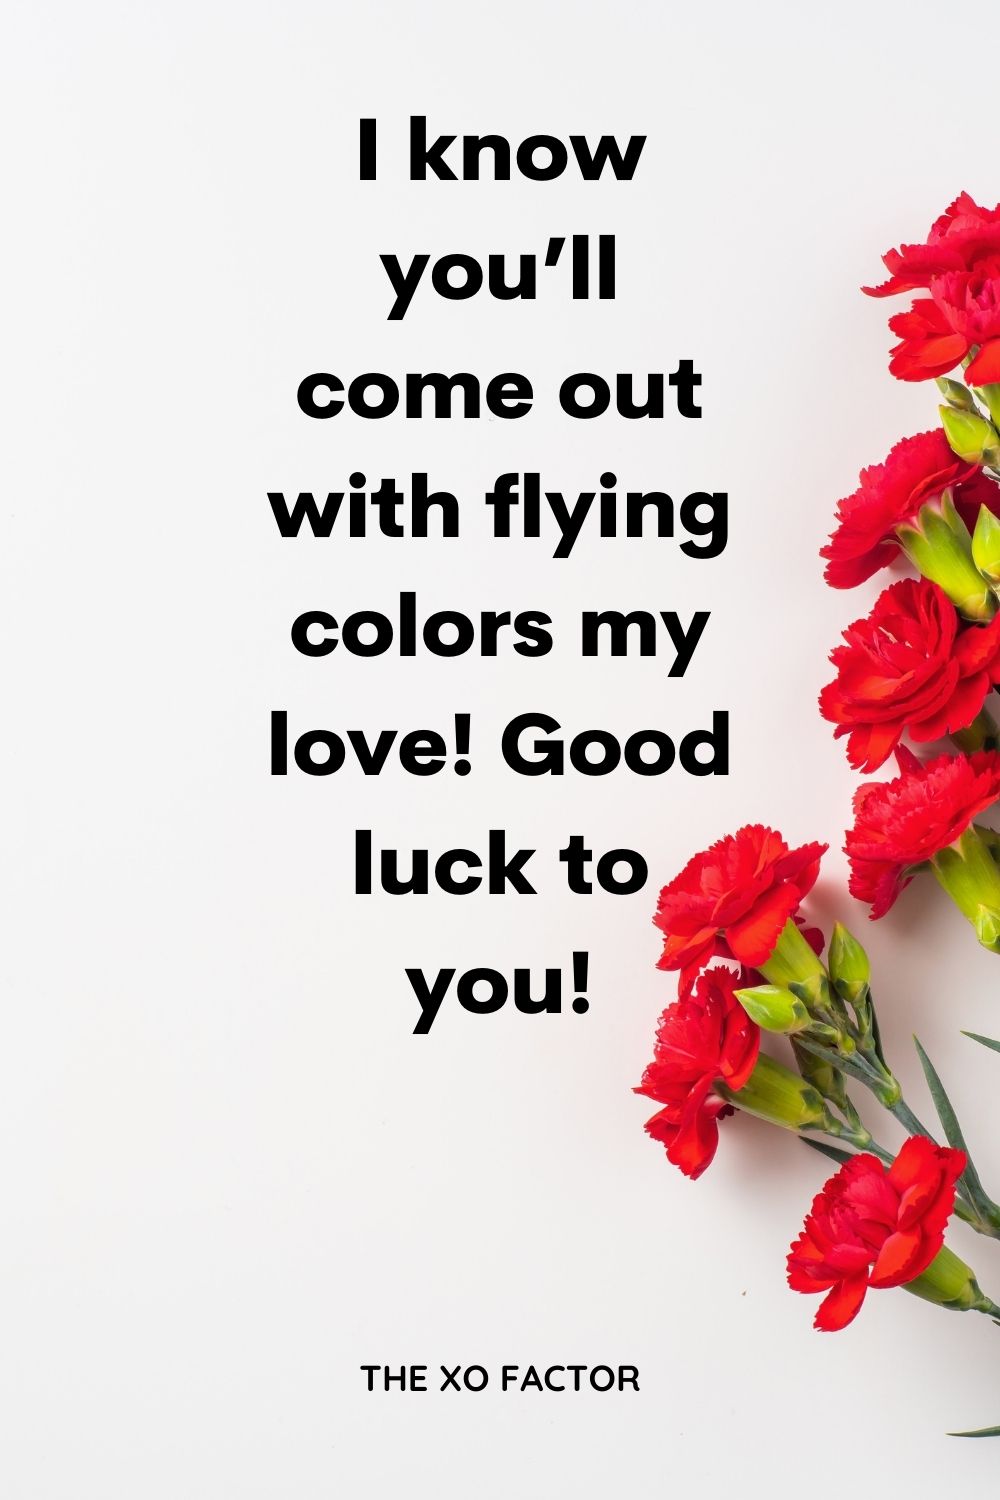 I know you’ll come out with flying colors my love! Good luck to you!